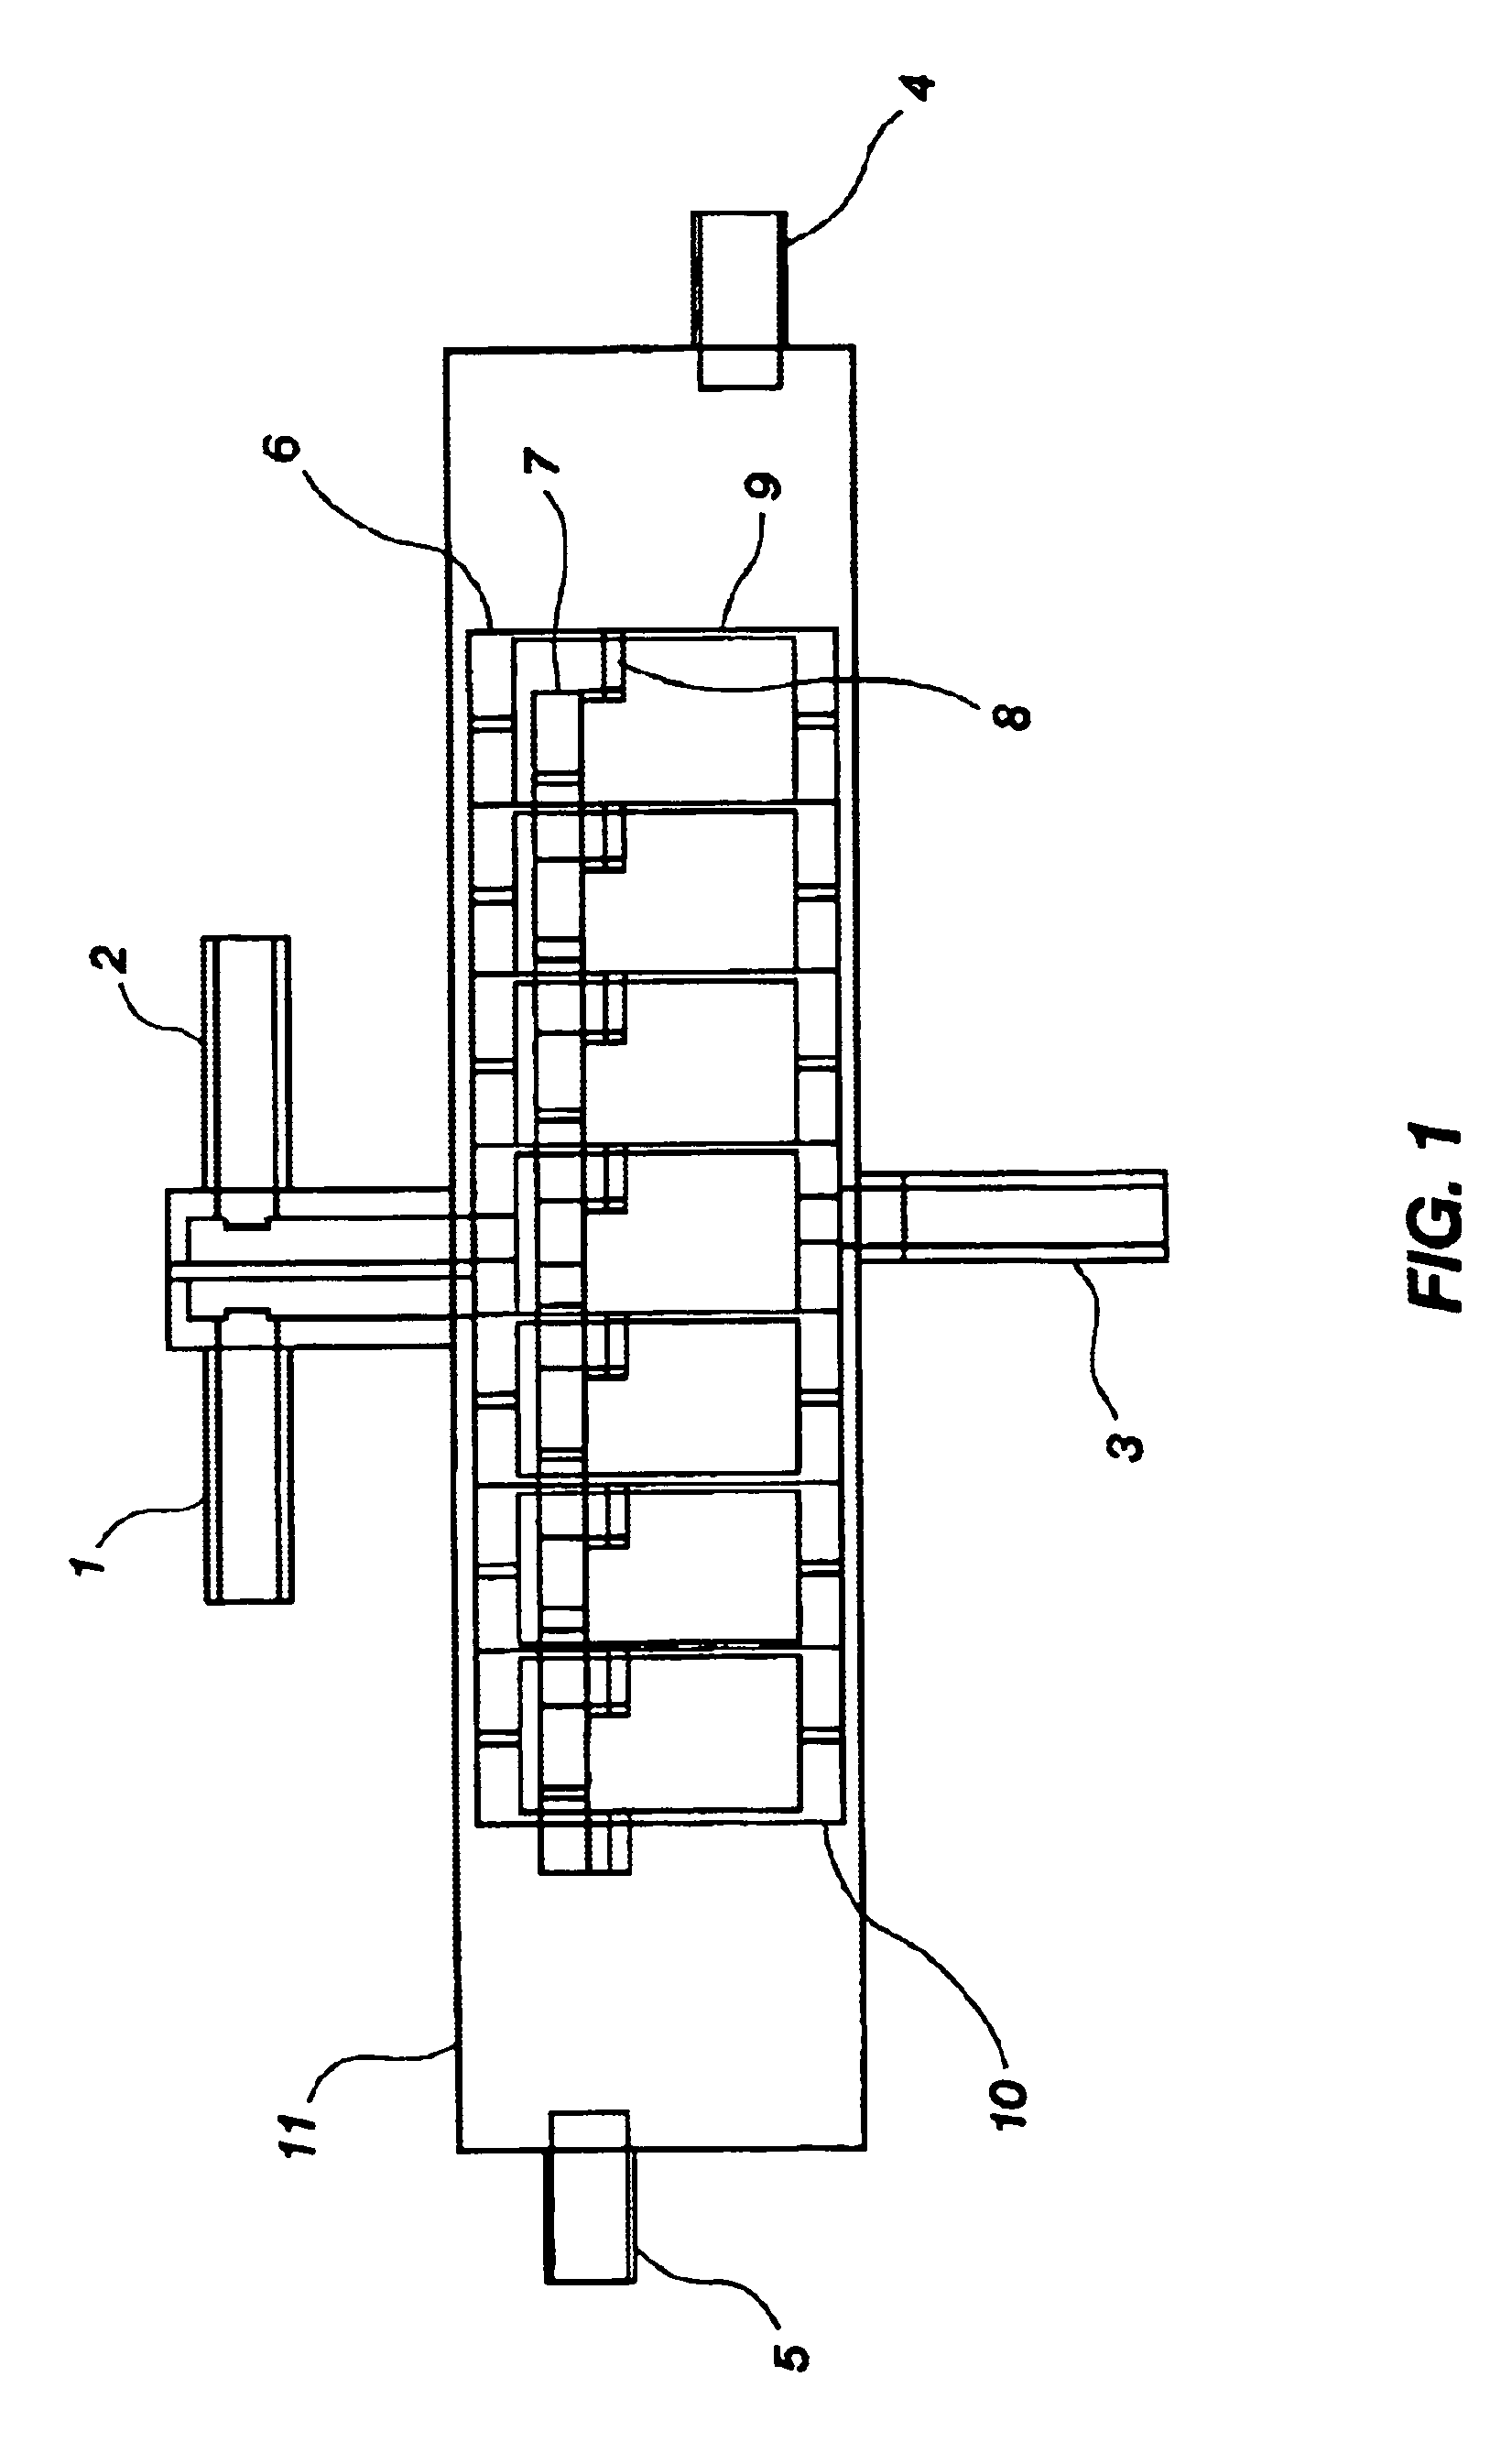 Fractal device for mixing and reactor applications